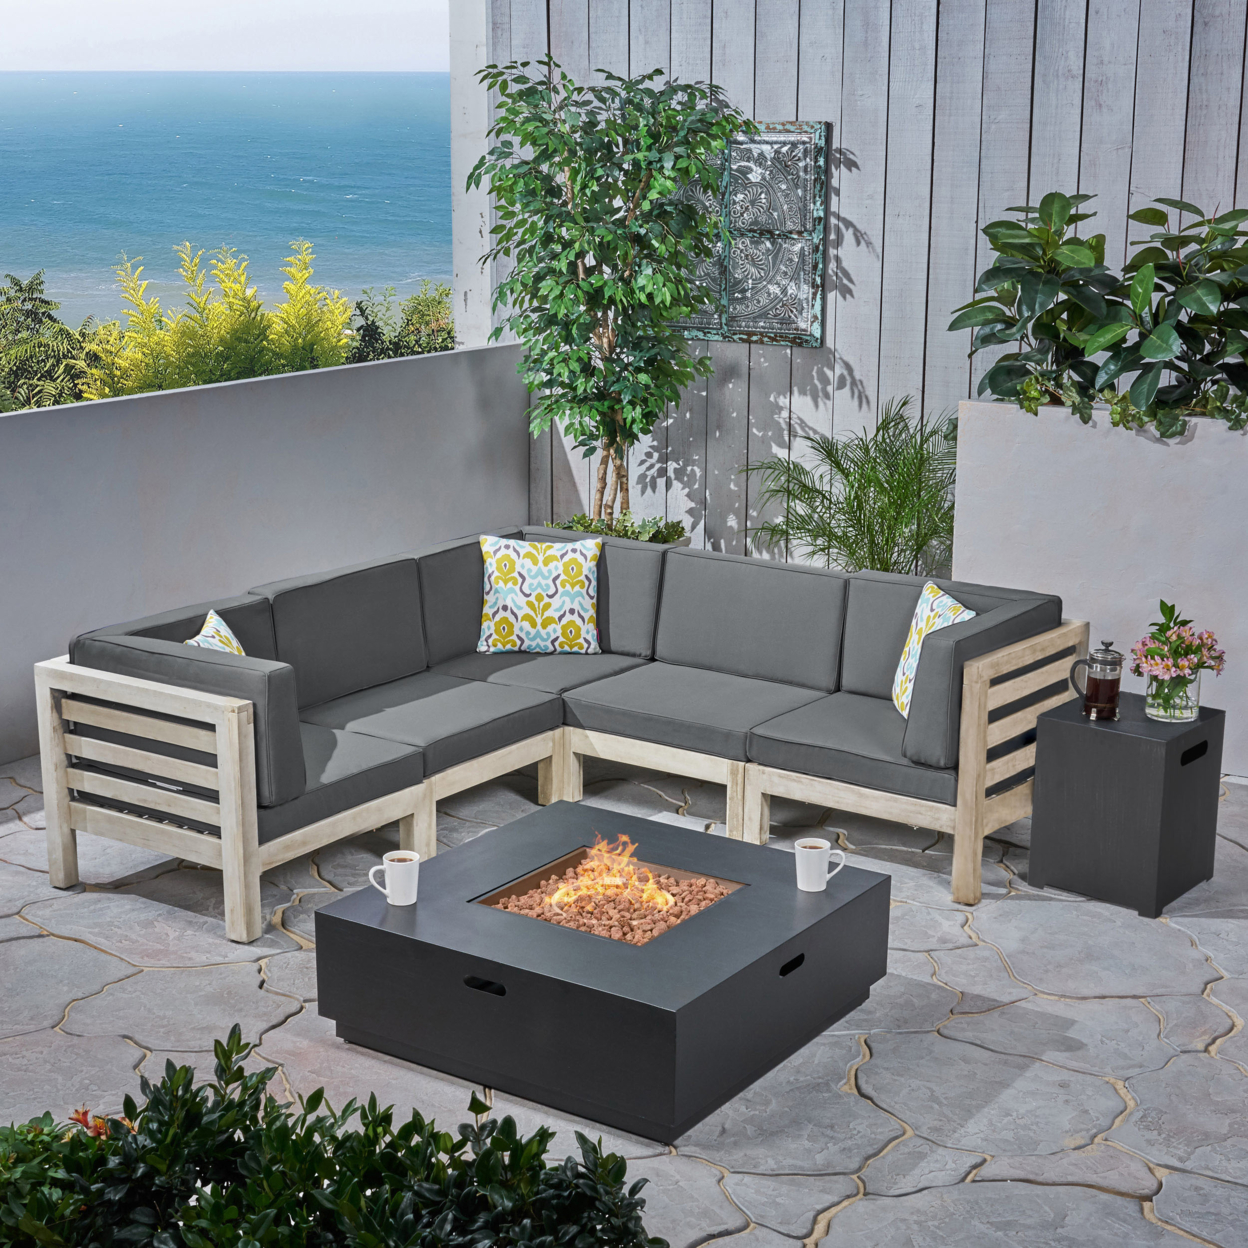 Krystin Outdoor V-Shaped Sectional Sofa Set With Fire Pit - Teak / Red